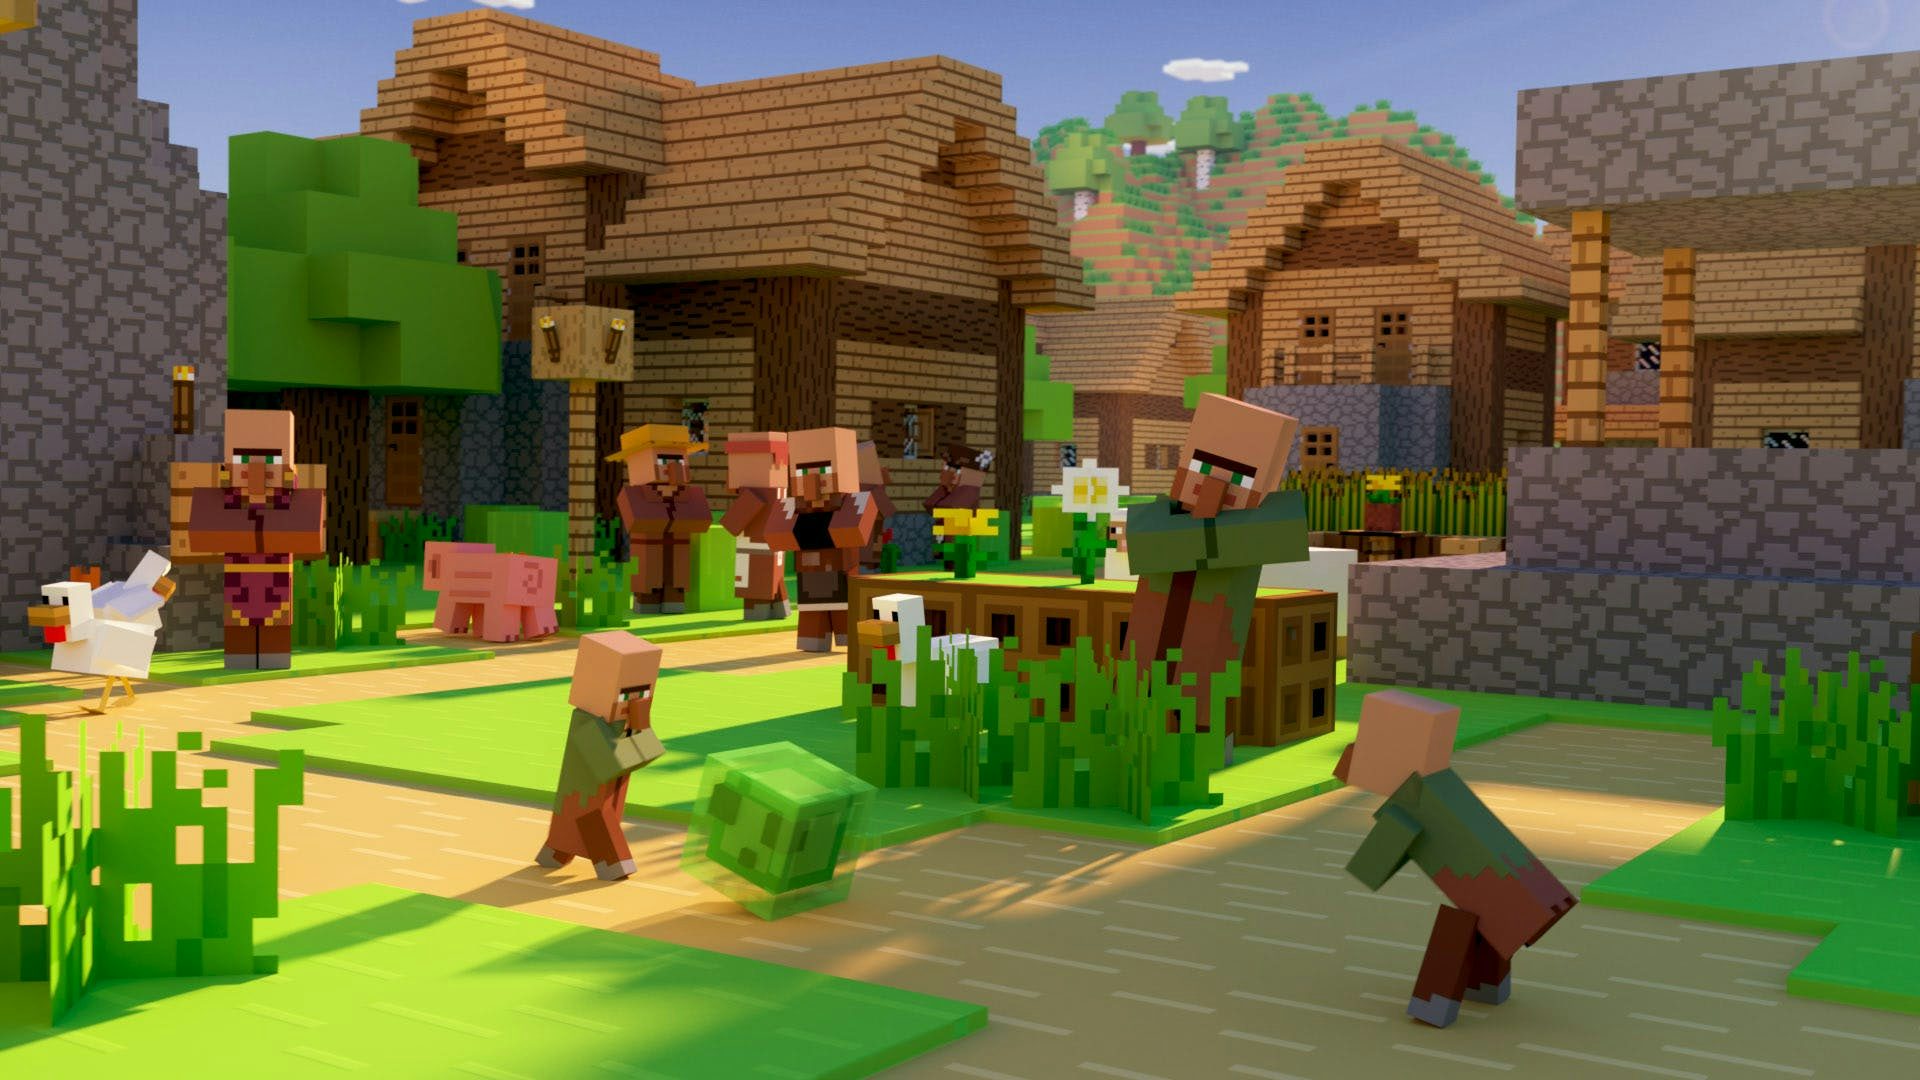 Two baby villagers playing soccer with a slime. In the background there are chickens and villagers running around. Town square in the background.